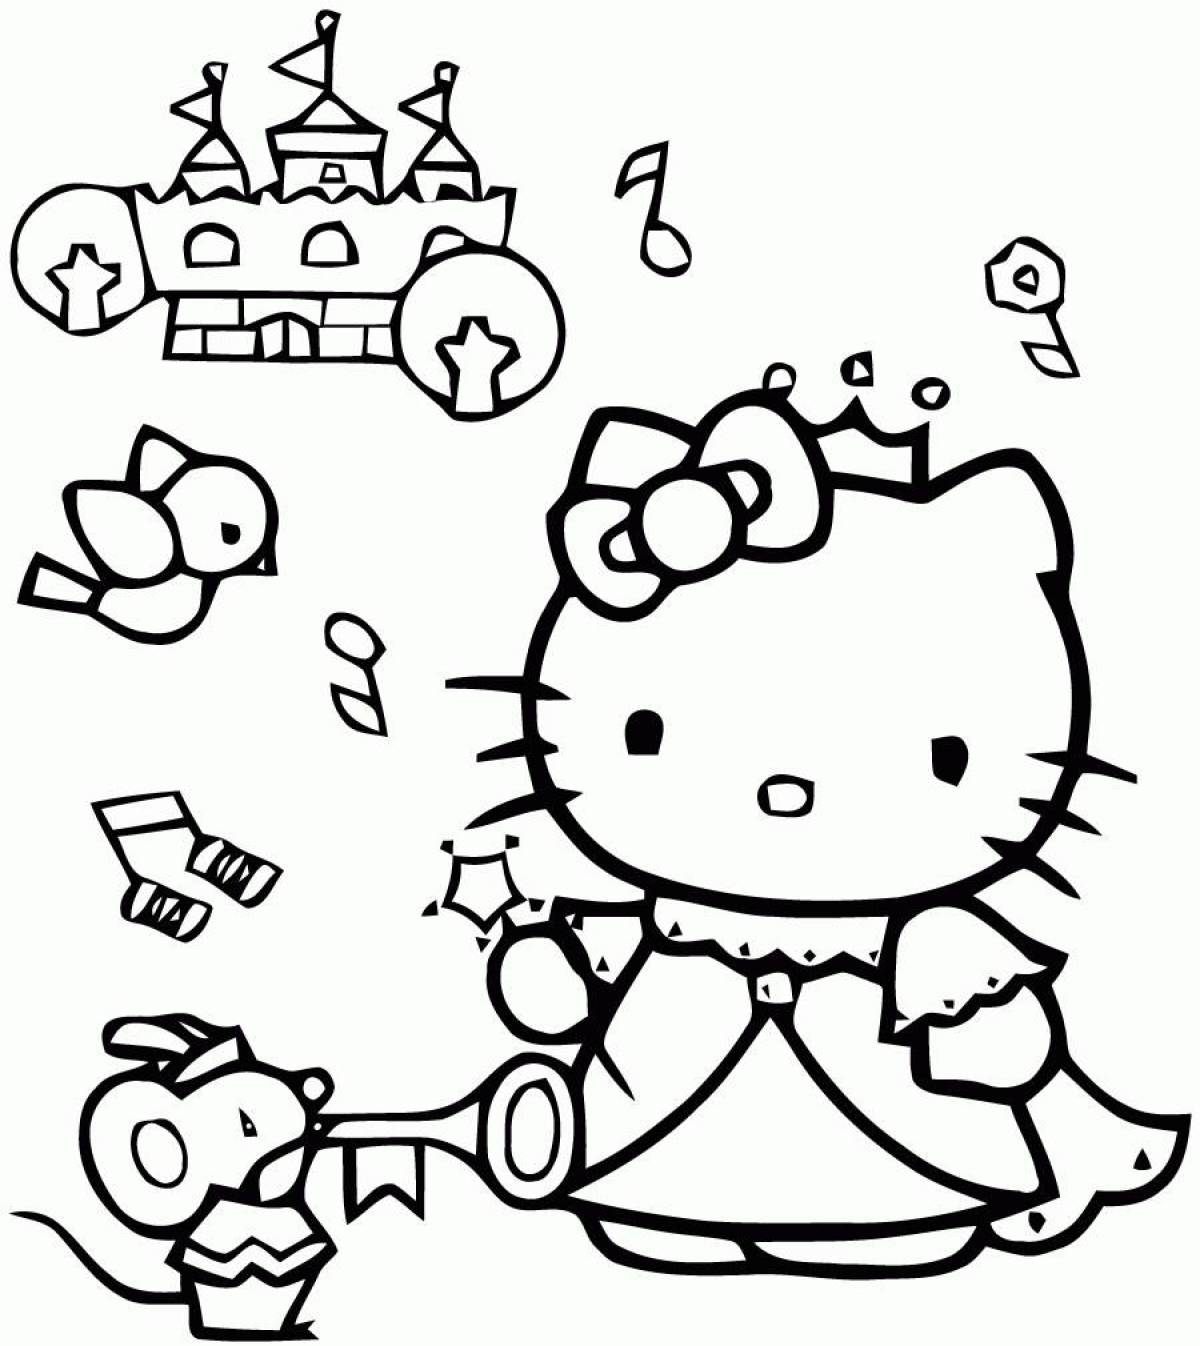 For girls hello kitty #3